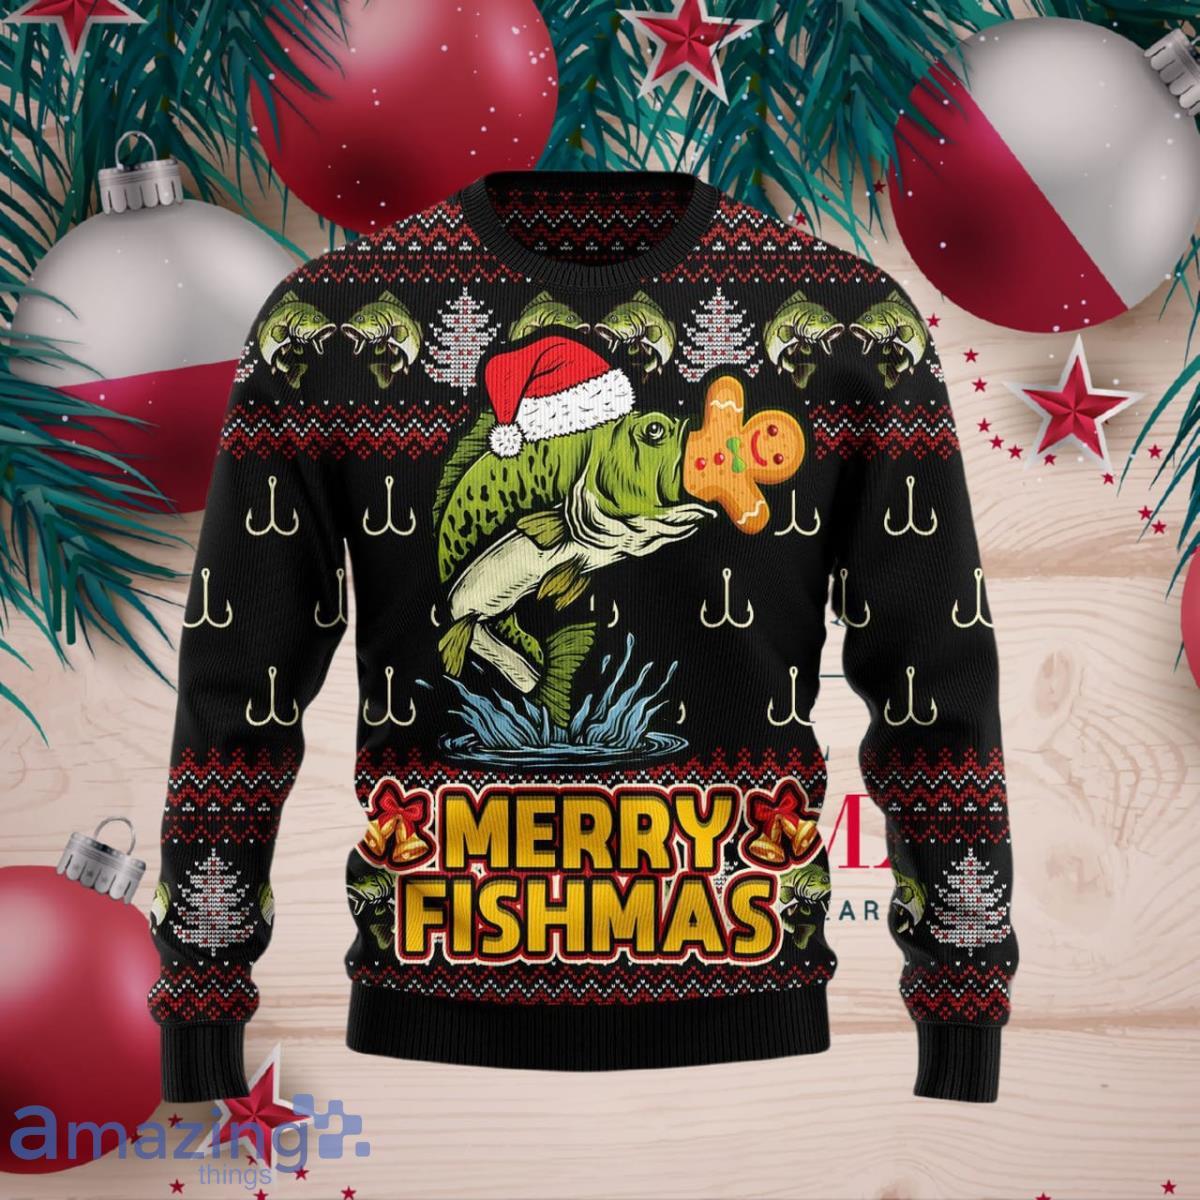 Merry Fishmas Ugly Christmas Sweater. – Merry Christmas Sweaters